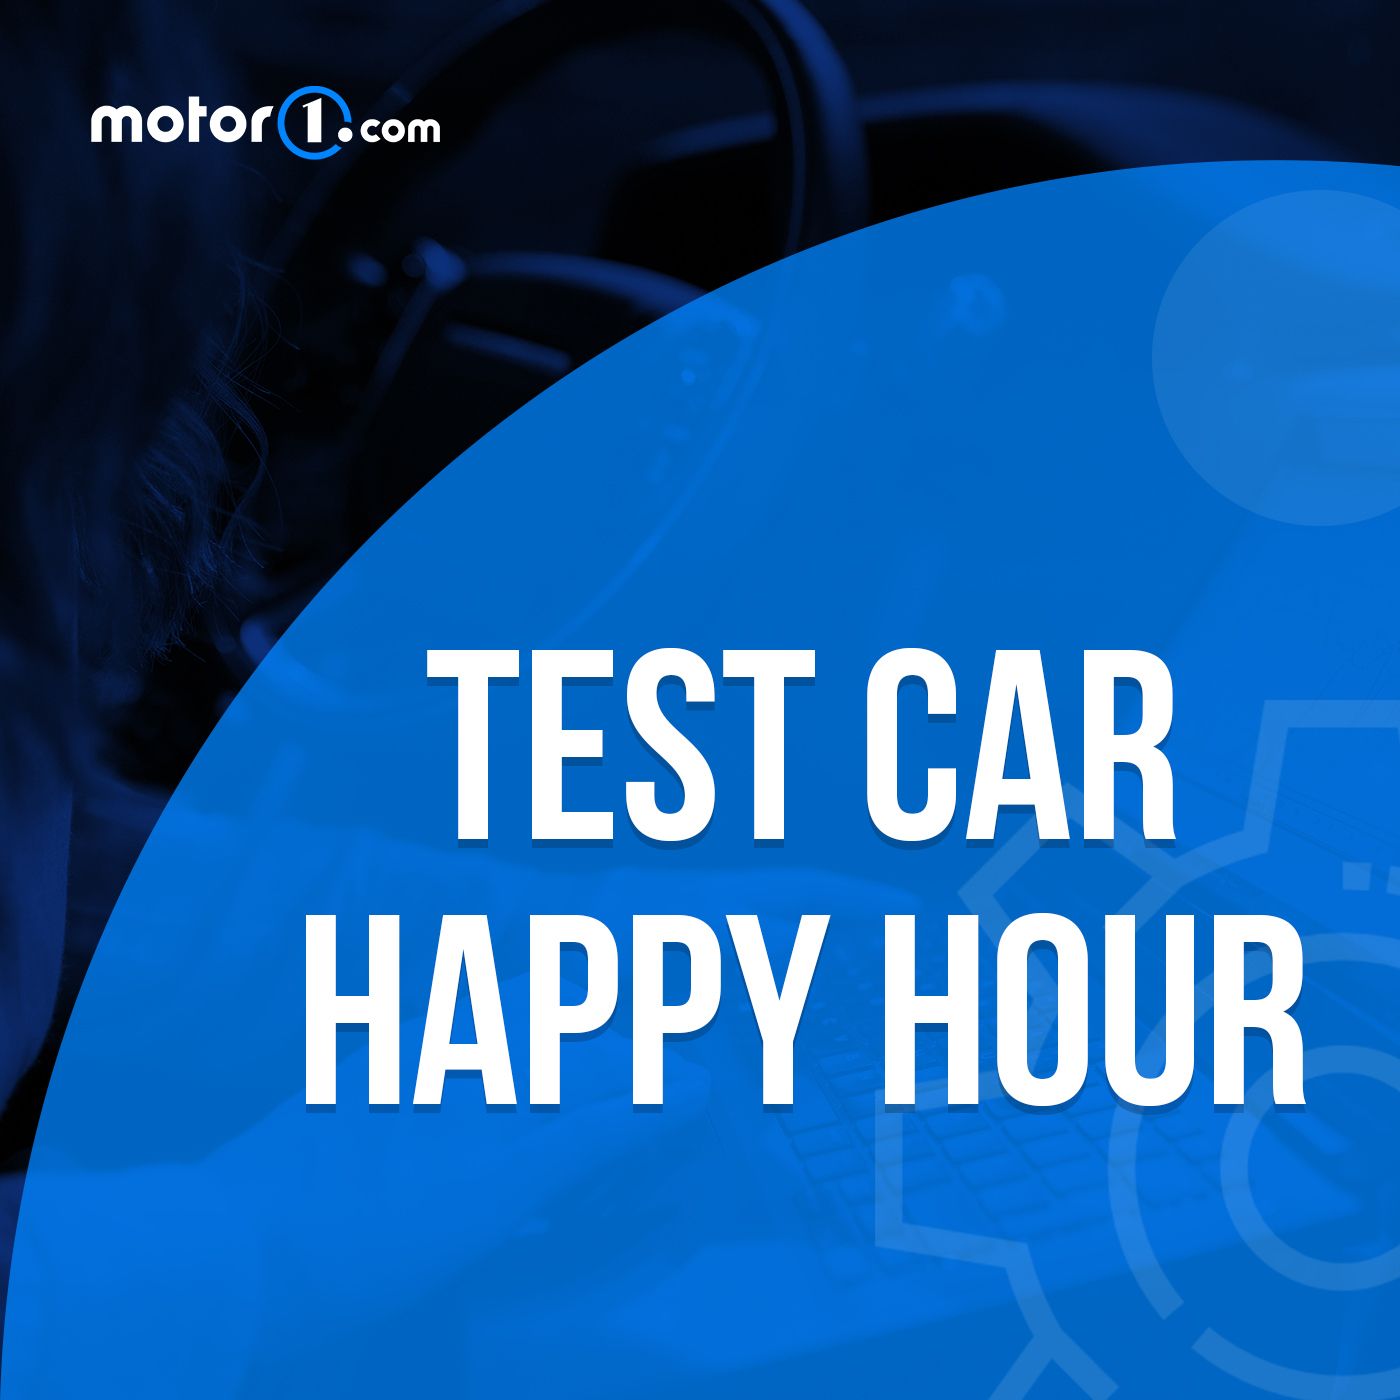 S1 Ep41: Motor1 Test Car Happy Hour #41: The Best EVs Under $60K, Alfa Romeo Tonale, And More!